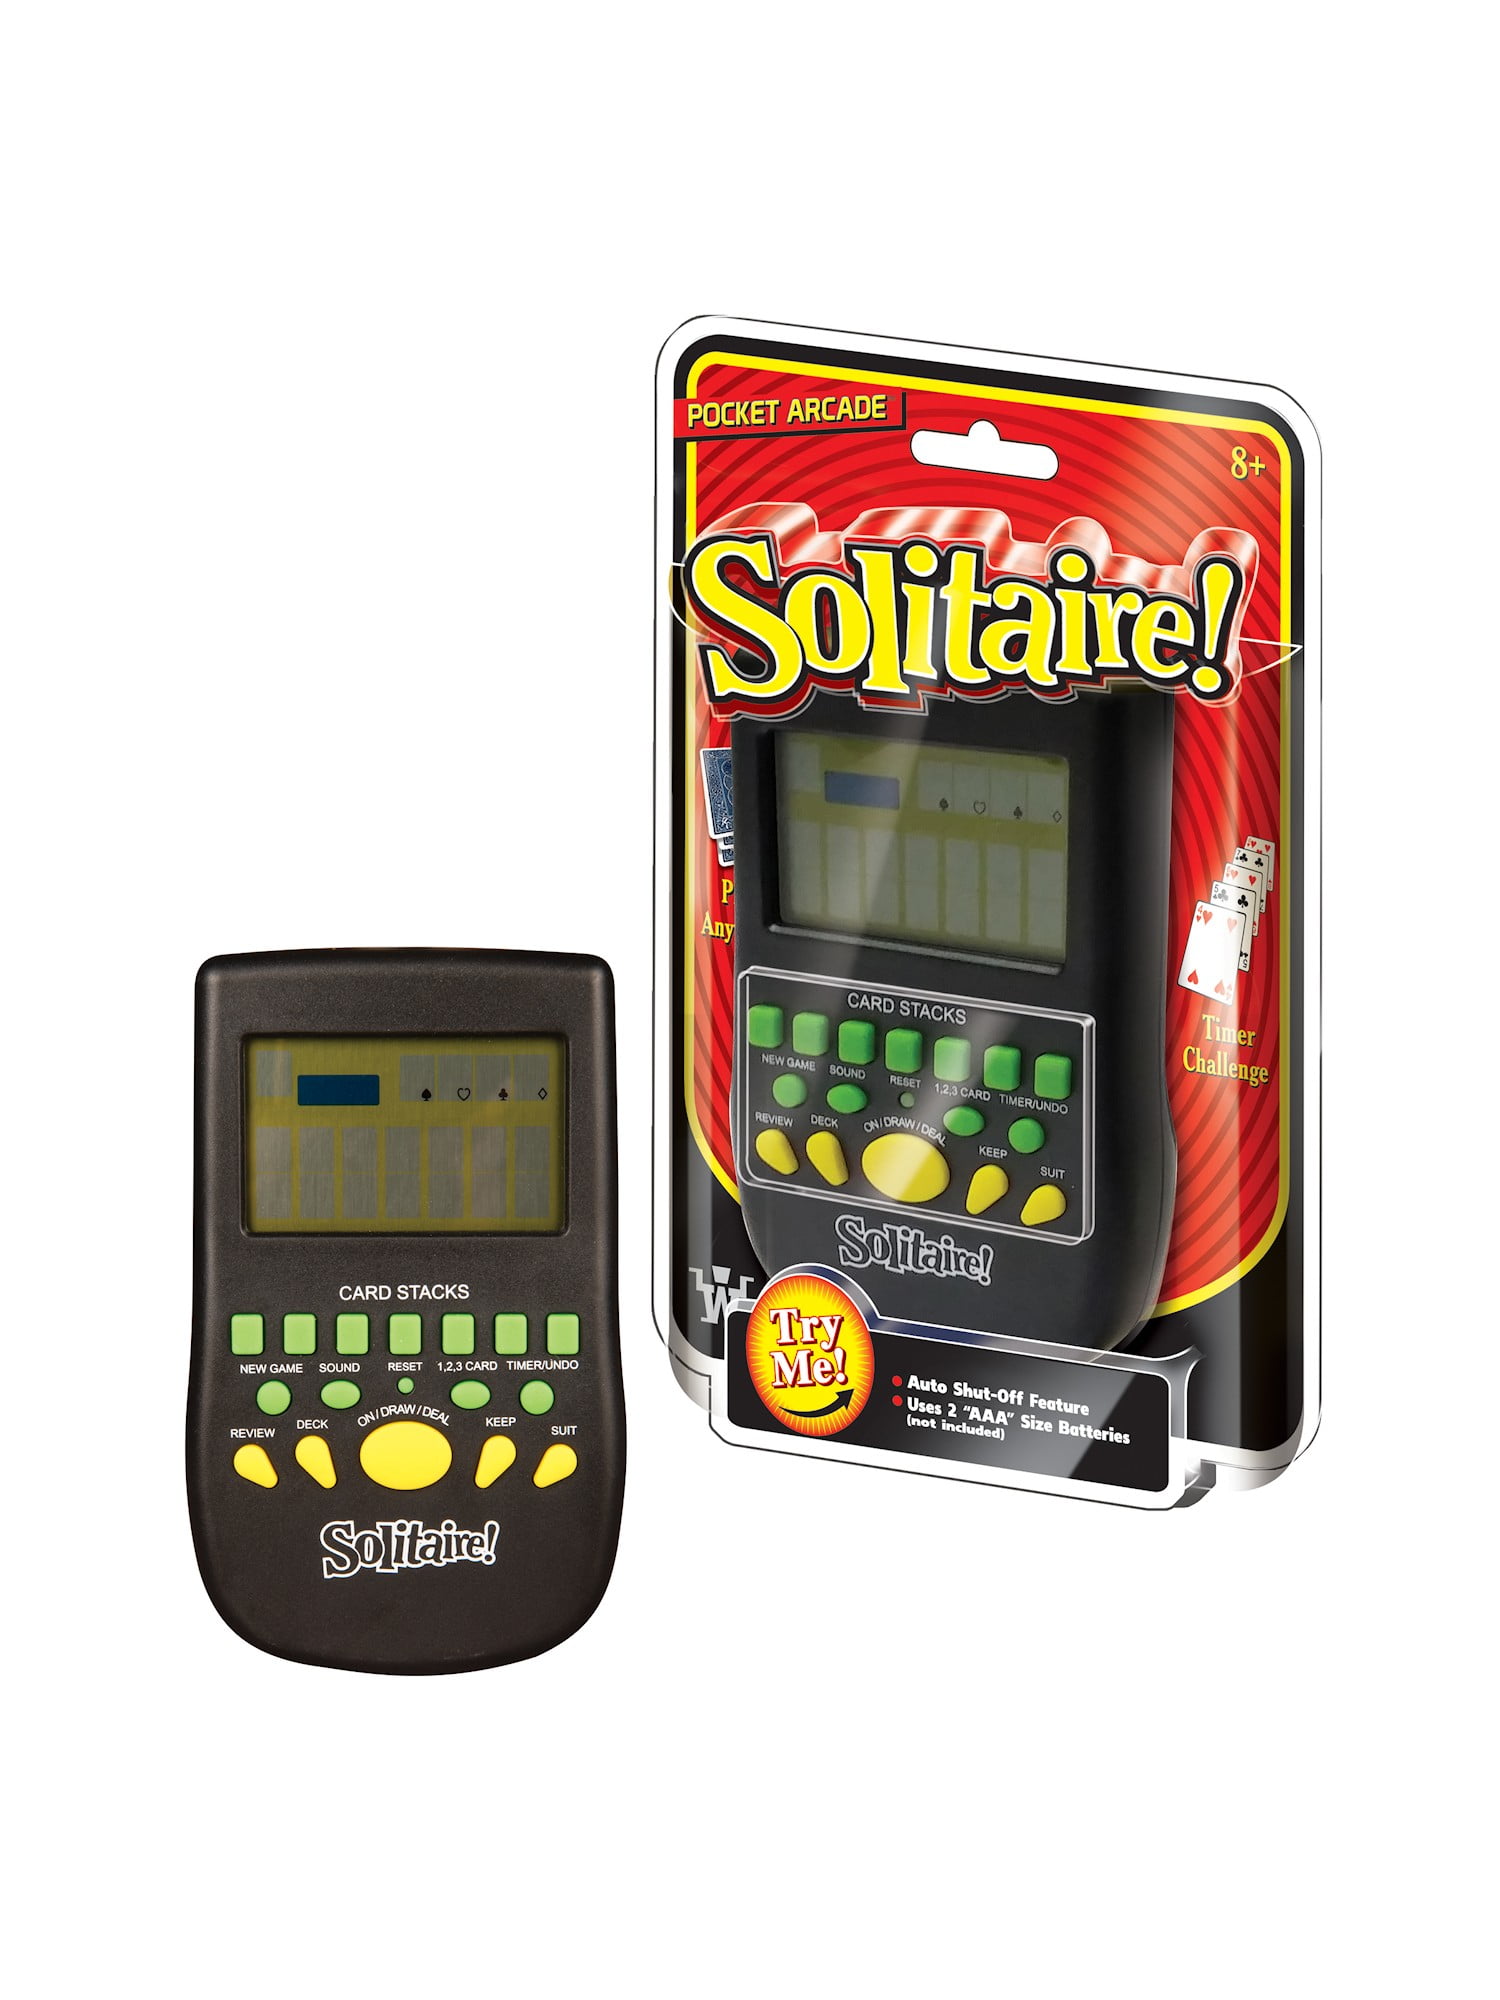 Toy Solitaire Hand Held Electronic Arcade Pocket Game Handheld Play Classic Toys 